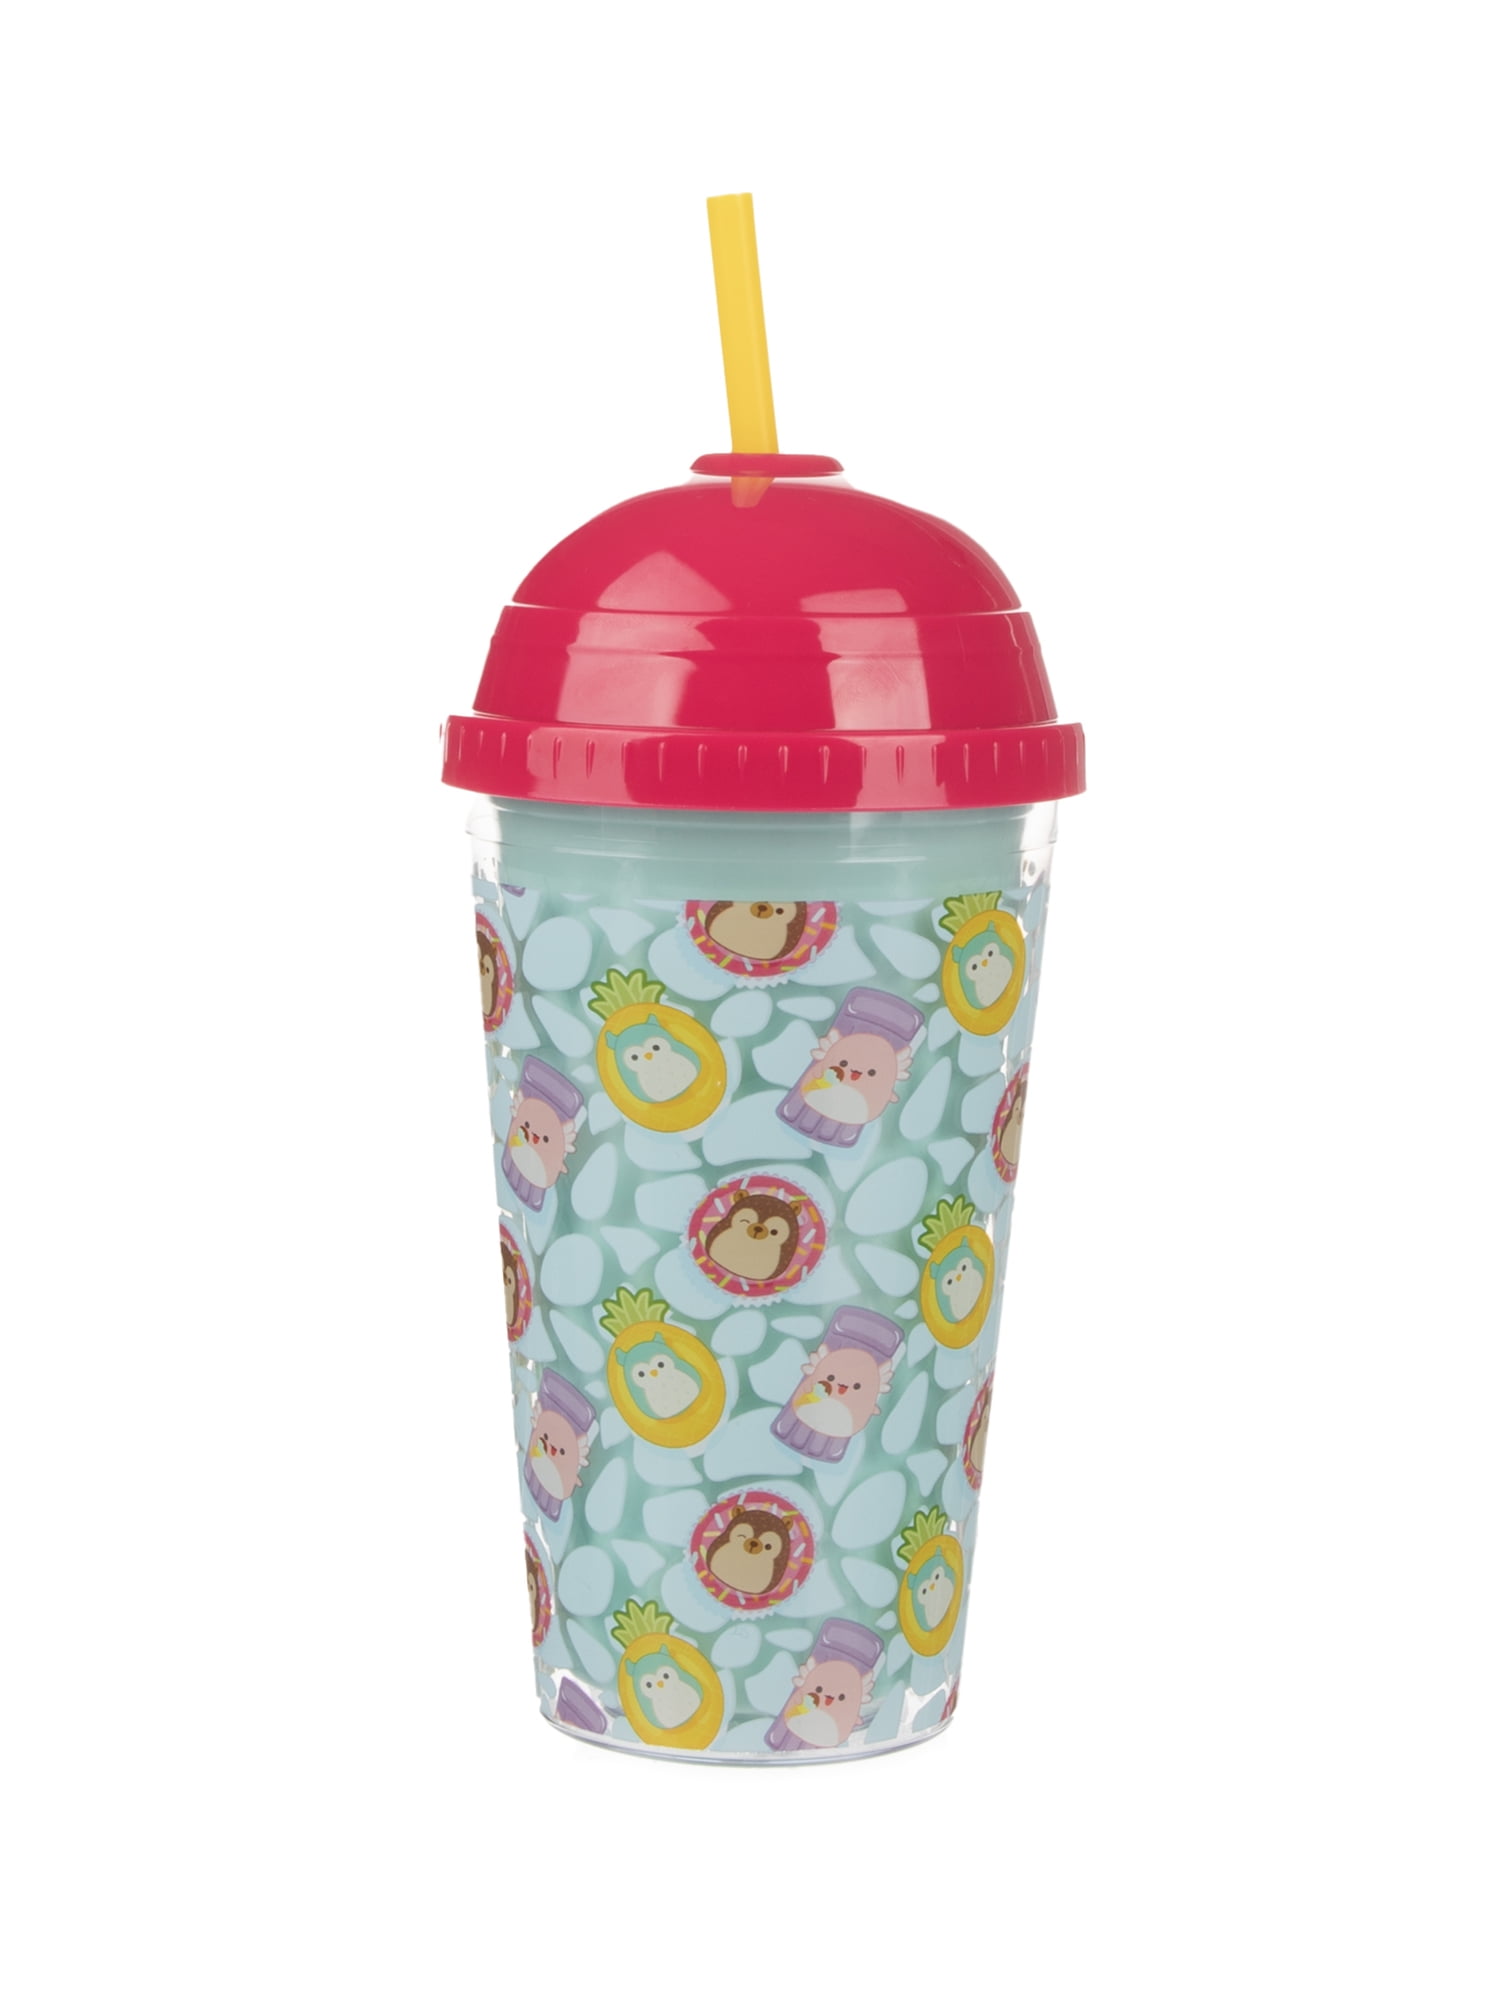 Squishmallow Tumbler Cup / Squishmallow Cup Sippy Cup, 20oz or